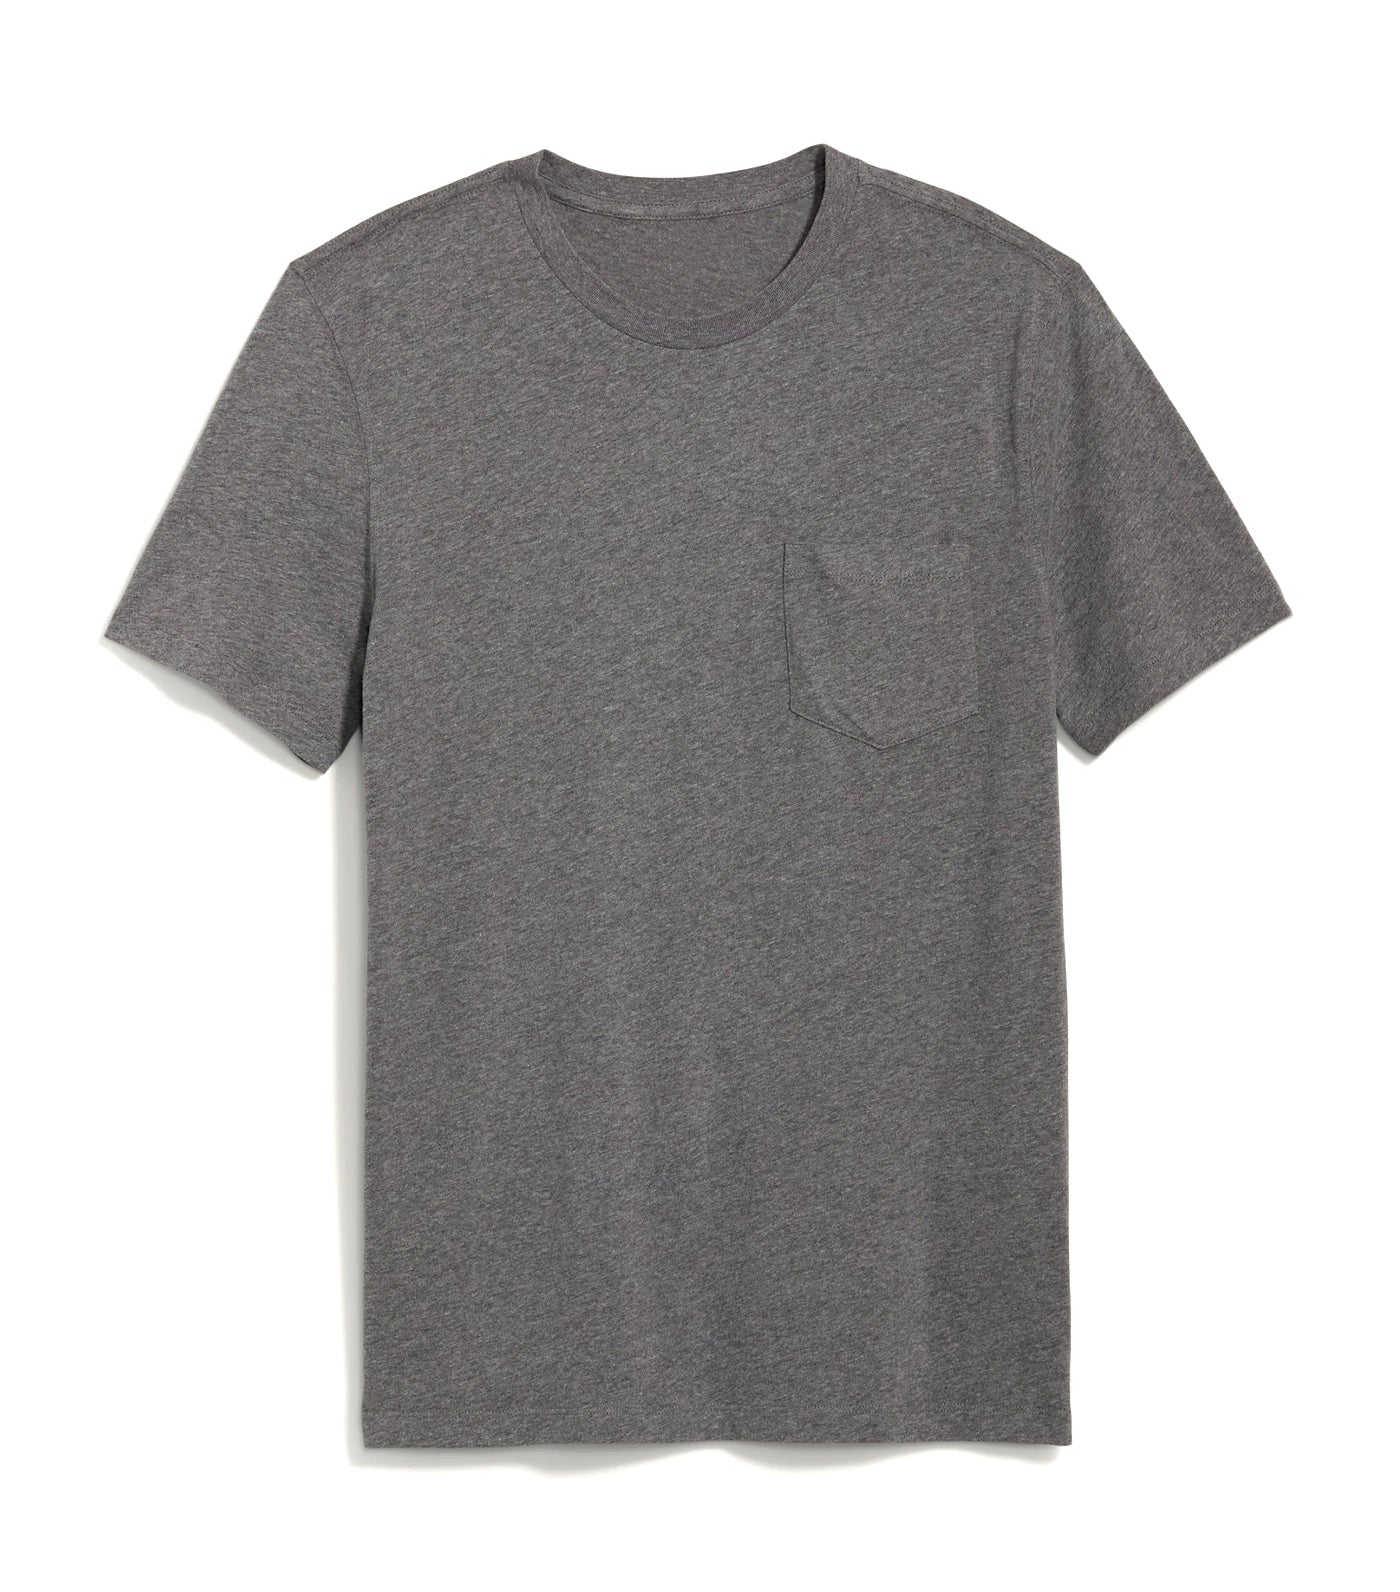 Soft-Washed Chest-Pocket Crew-Neck T-Shirt for Men Charcoal